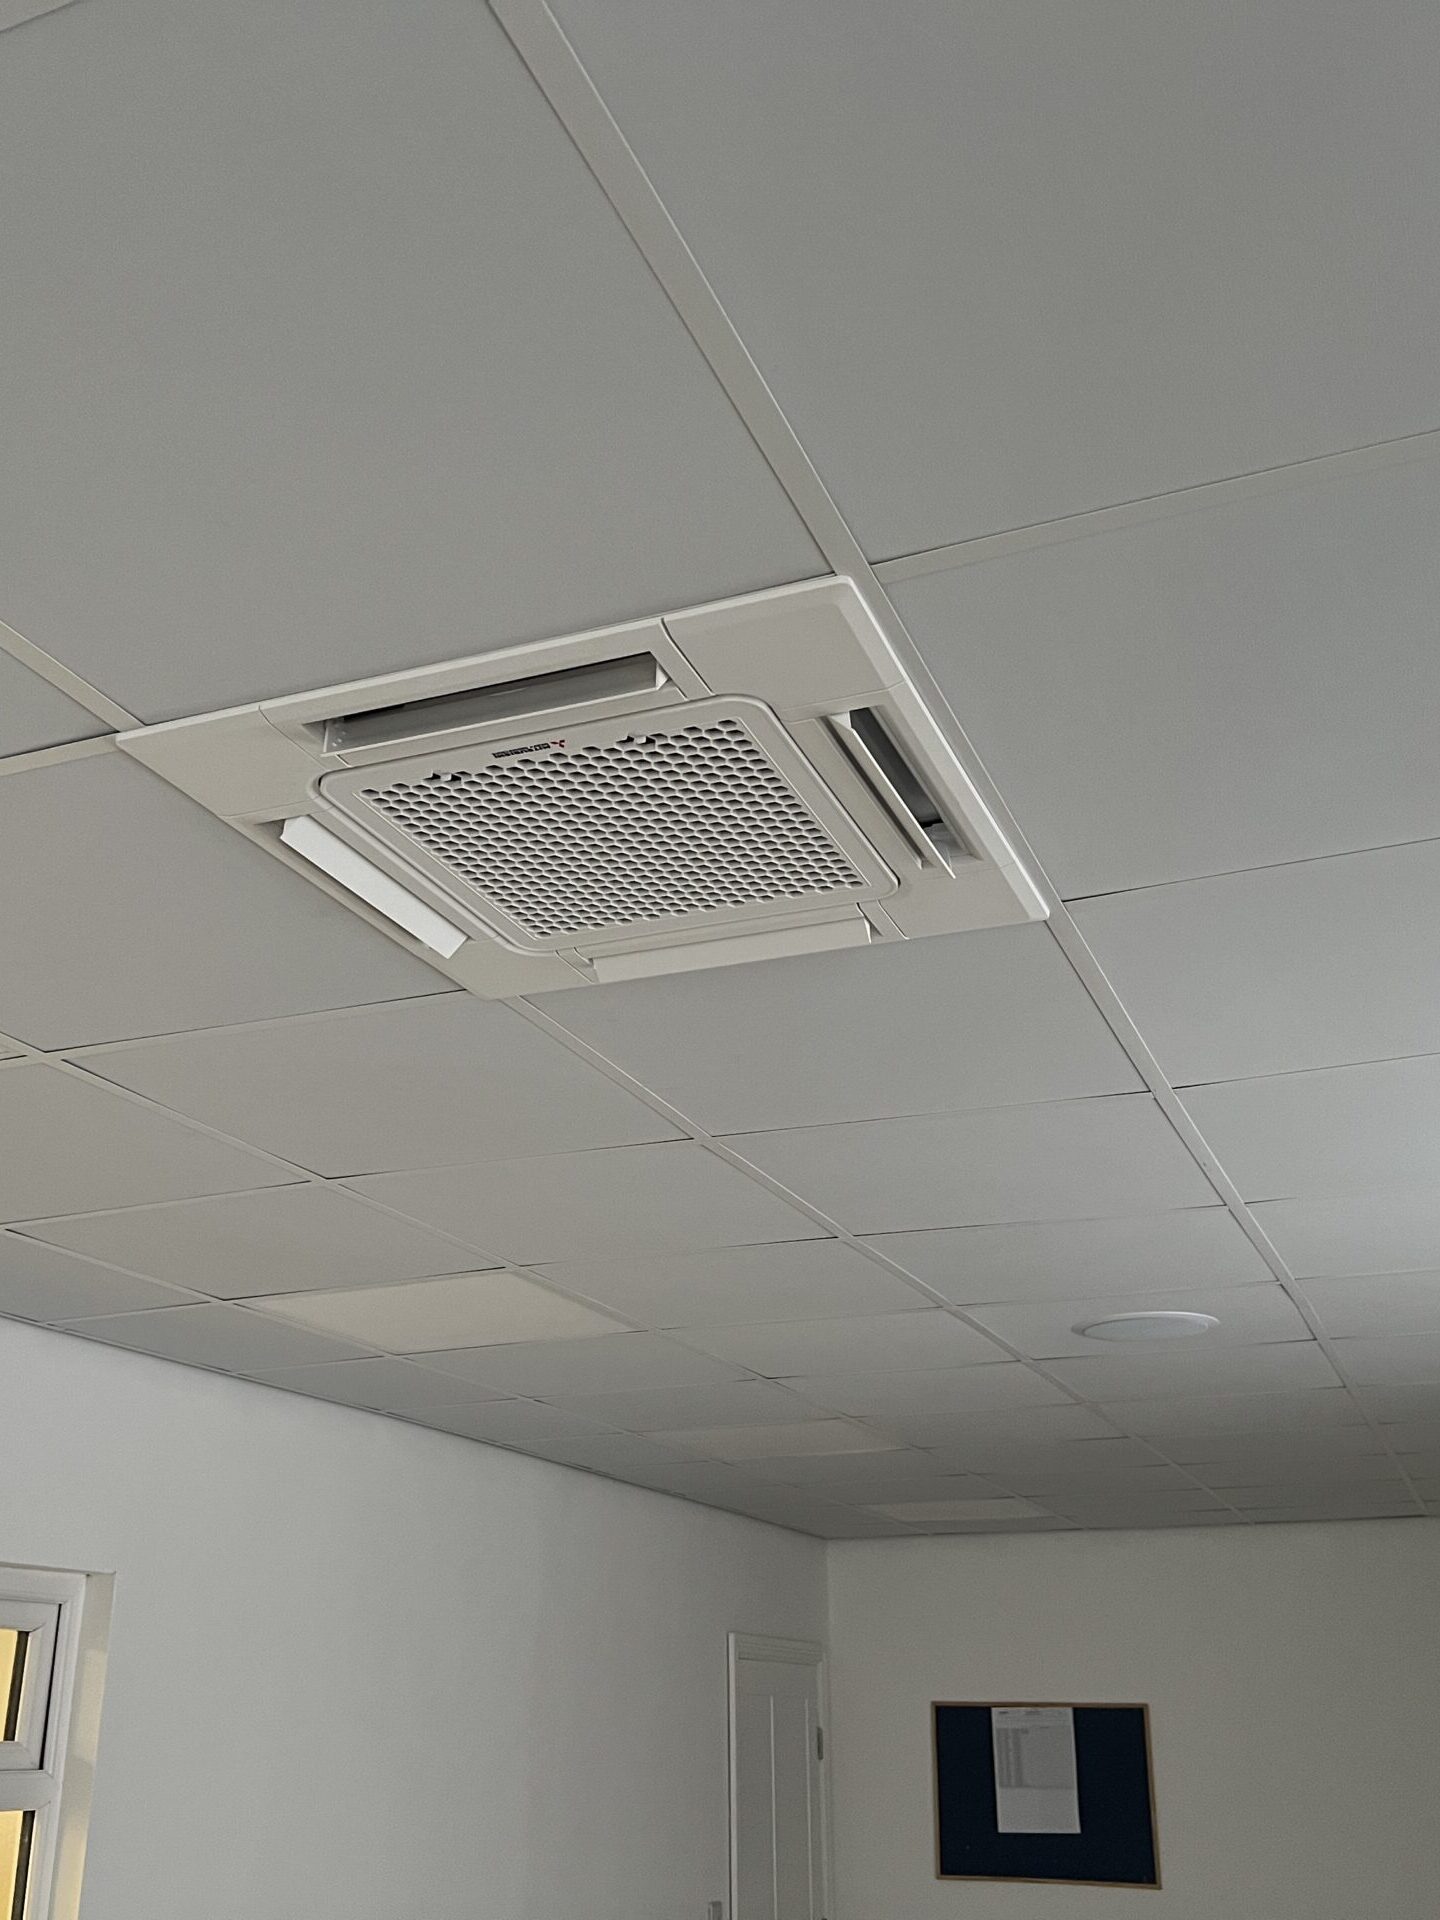 external picture of an airconditioning unit installed on a wall